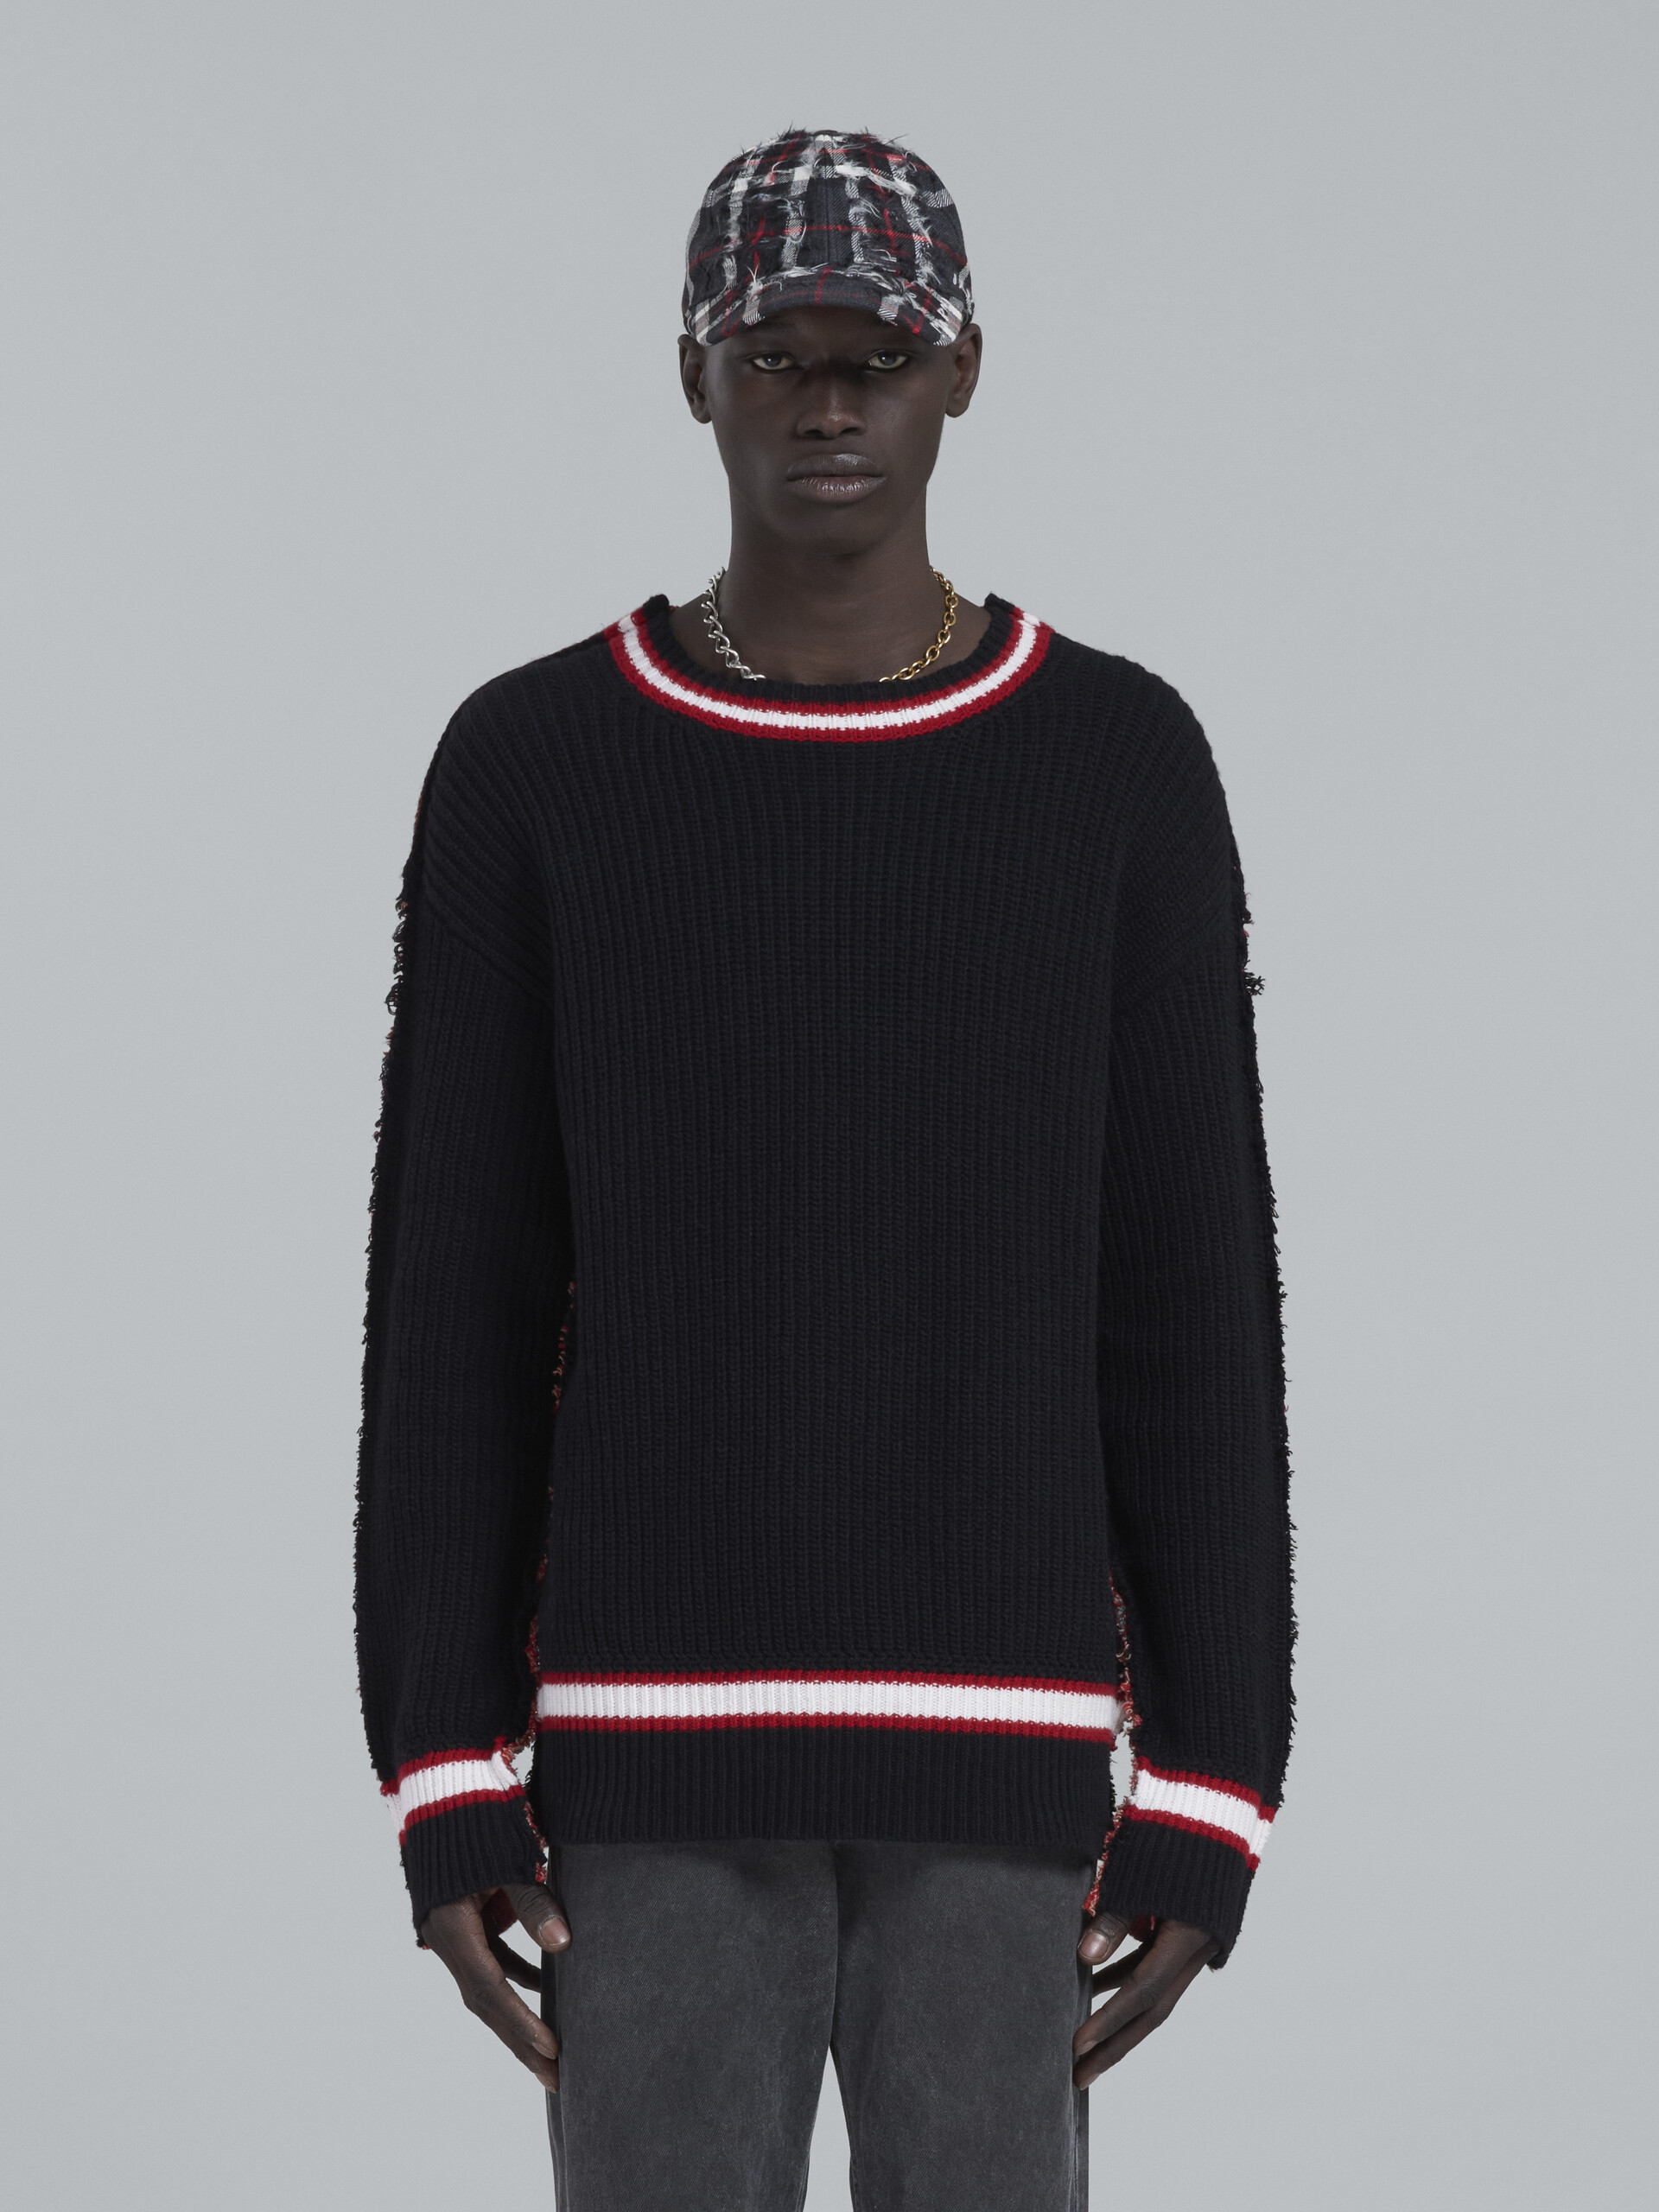 Black knitted crewneck sweater - Pullovers - Image 2